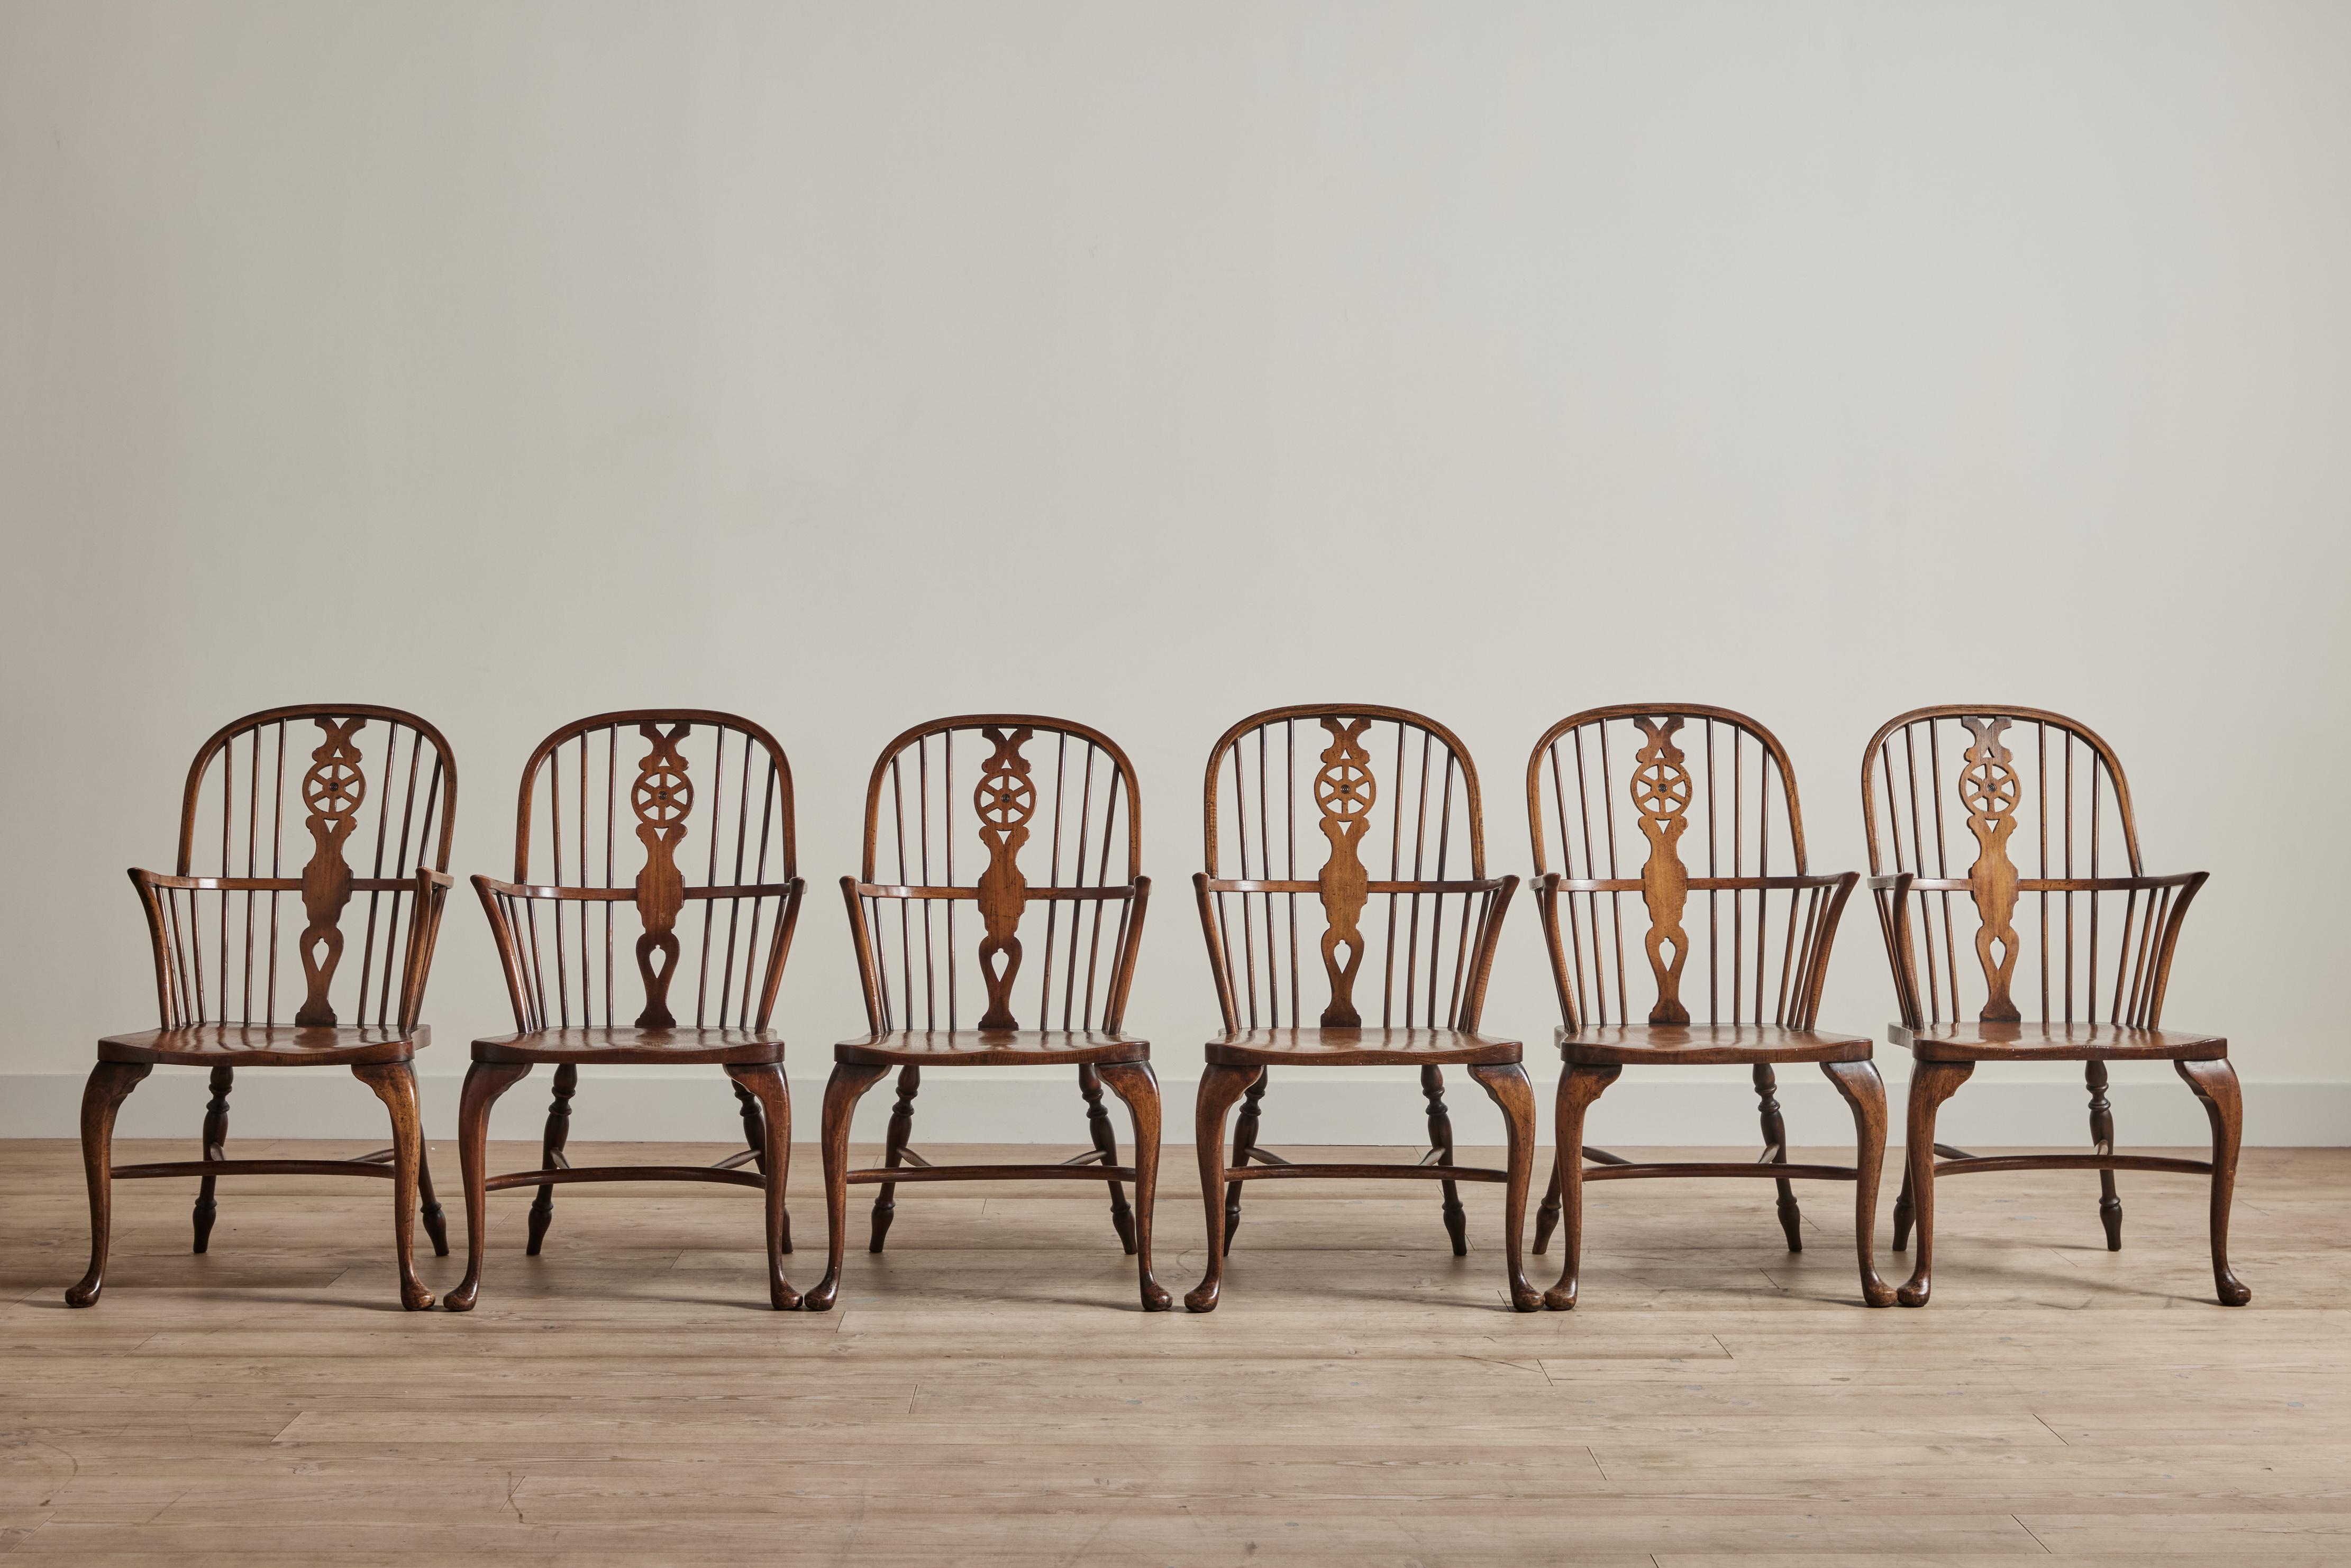 Set of six elmwood Georgian style windsor chairs from England circa 1960. Some wear on wood is consistent with age and use.